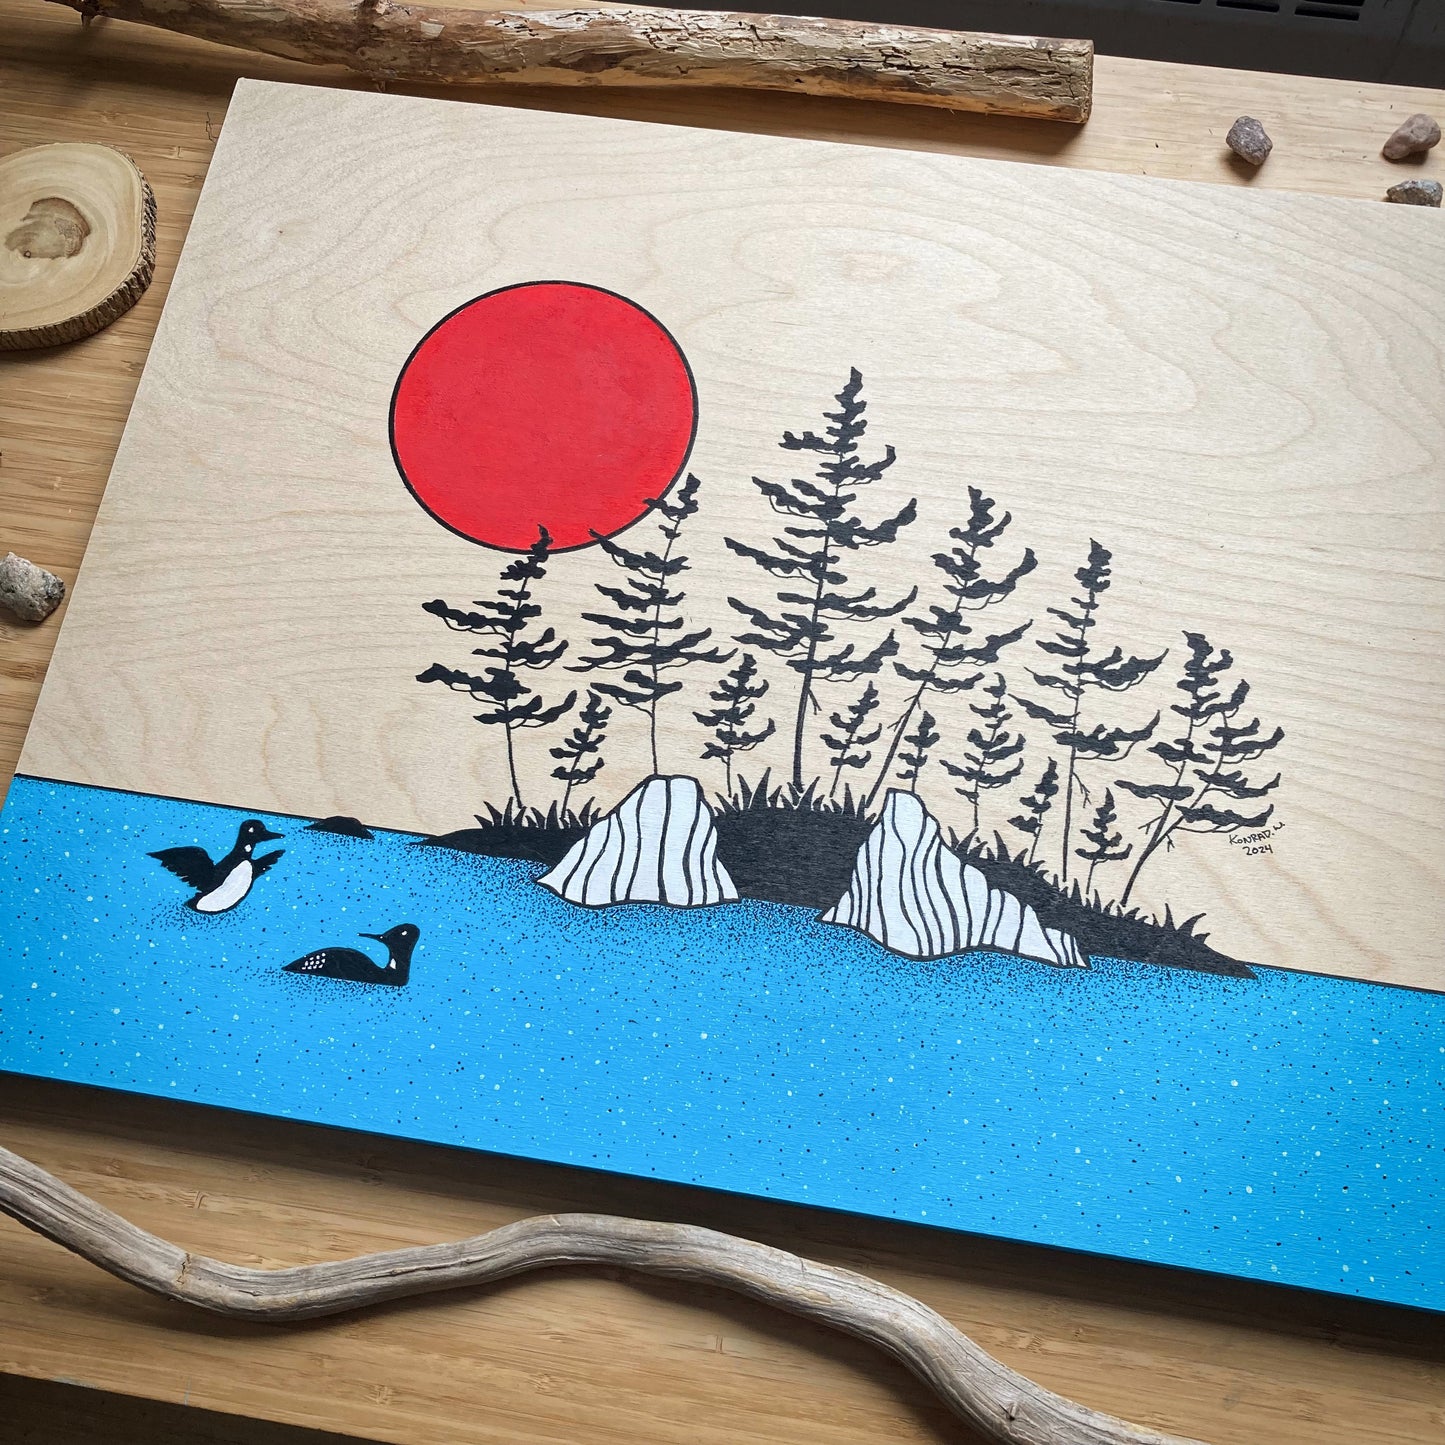 The Island With The Loons - ORIGINAL 18x24 Wood Panel Illustration